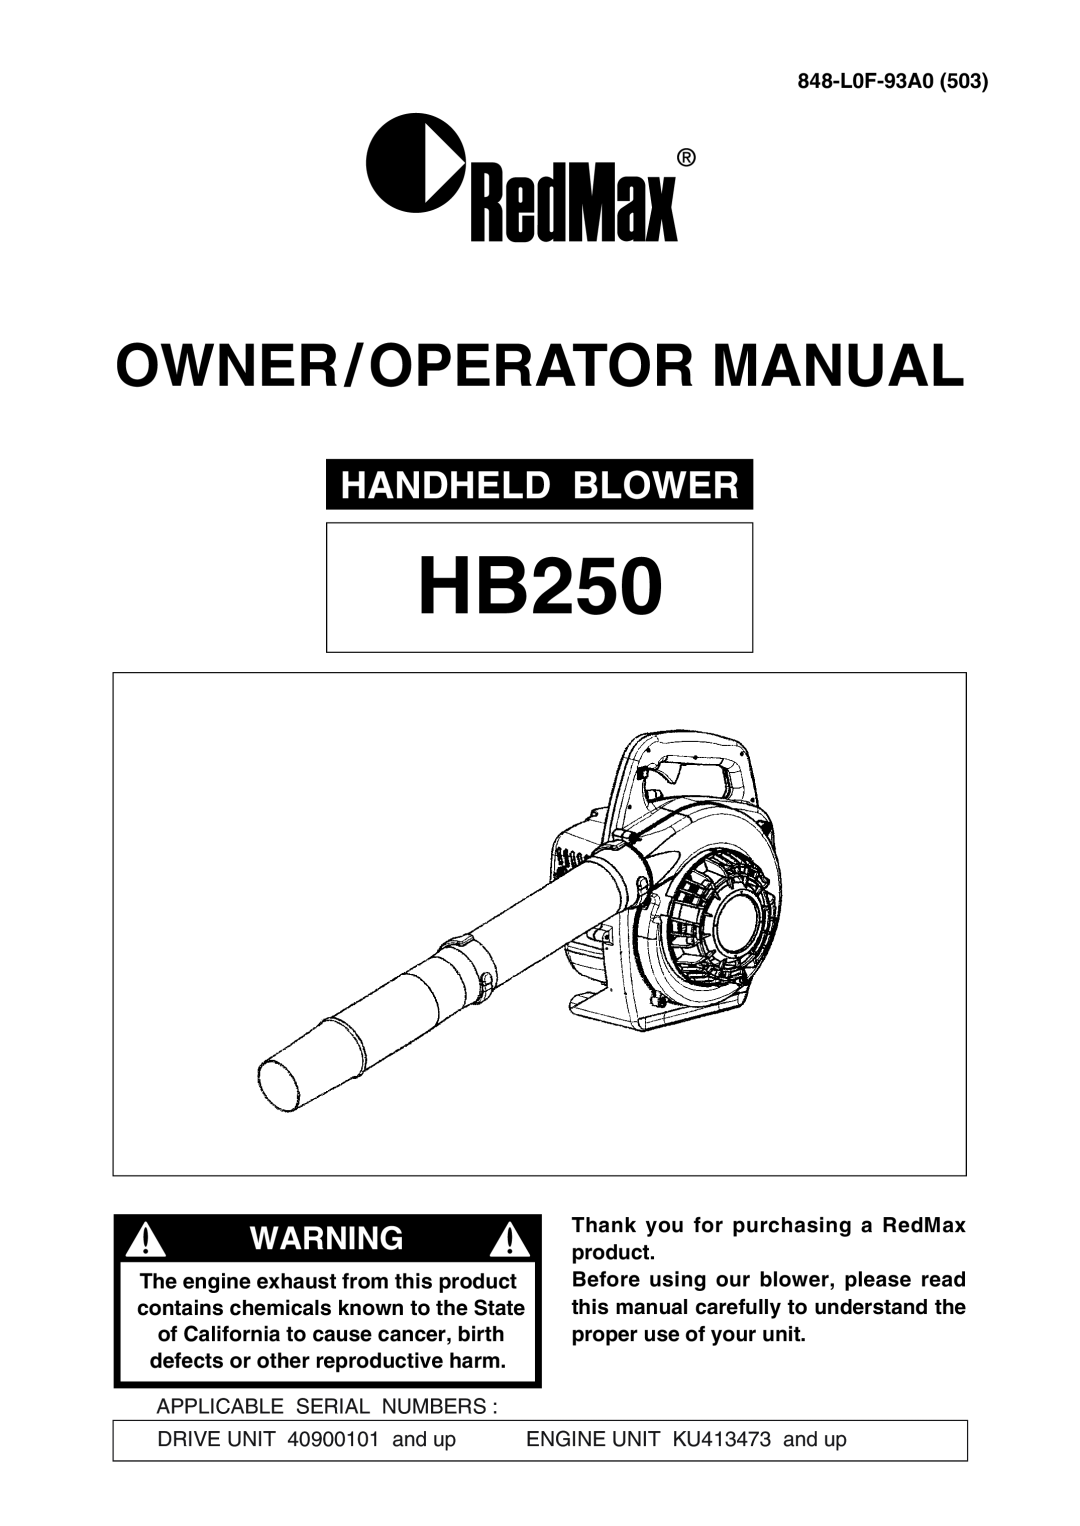 RedMax HB250 manual Handheld Blower, Owner/Operator Manual, 848-L0F-93A0, Thank you for purchasing a RedMax product 